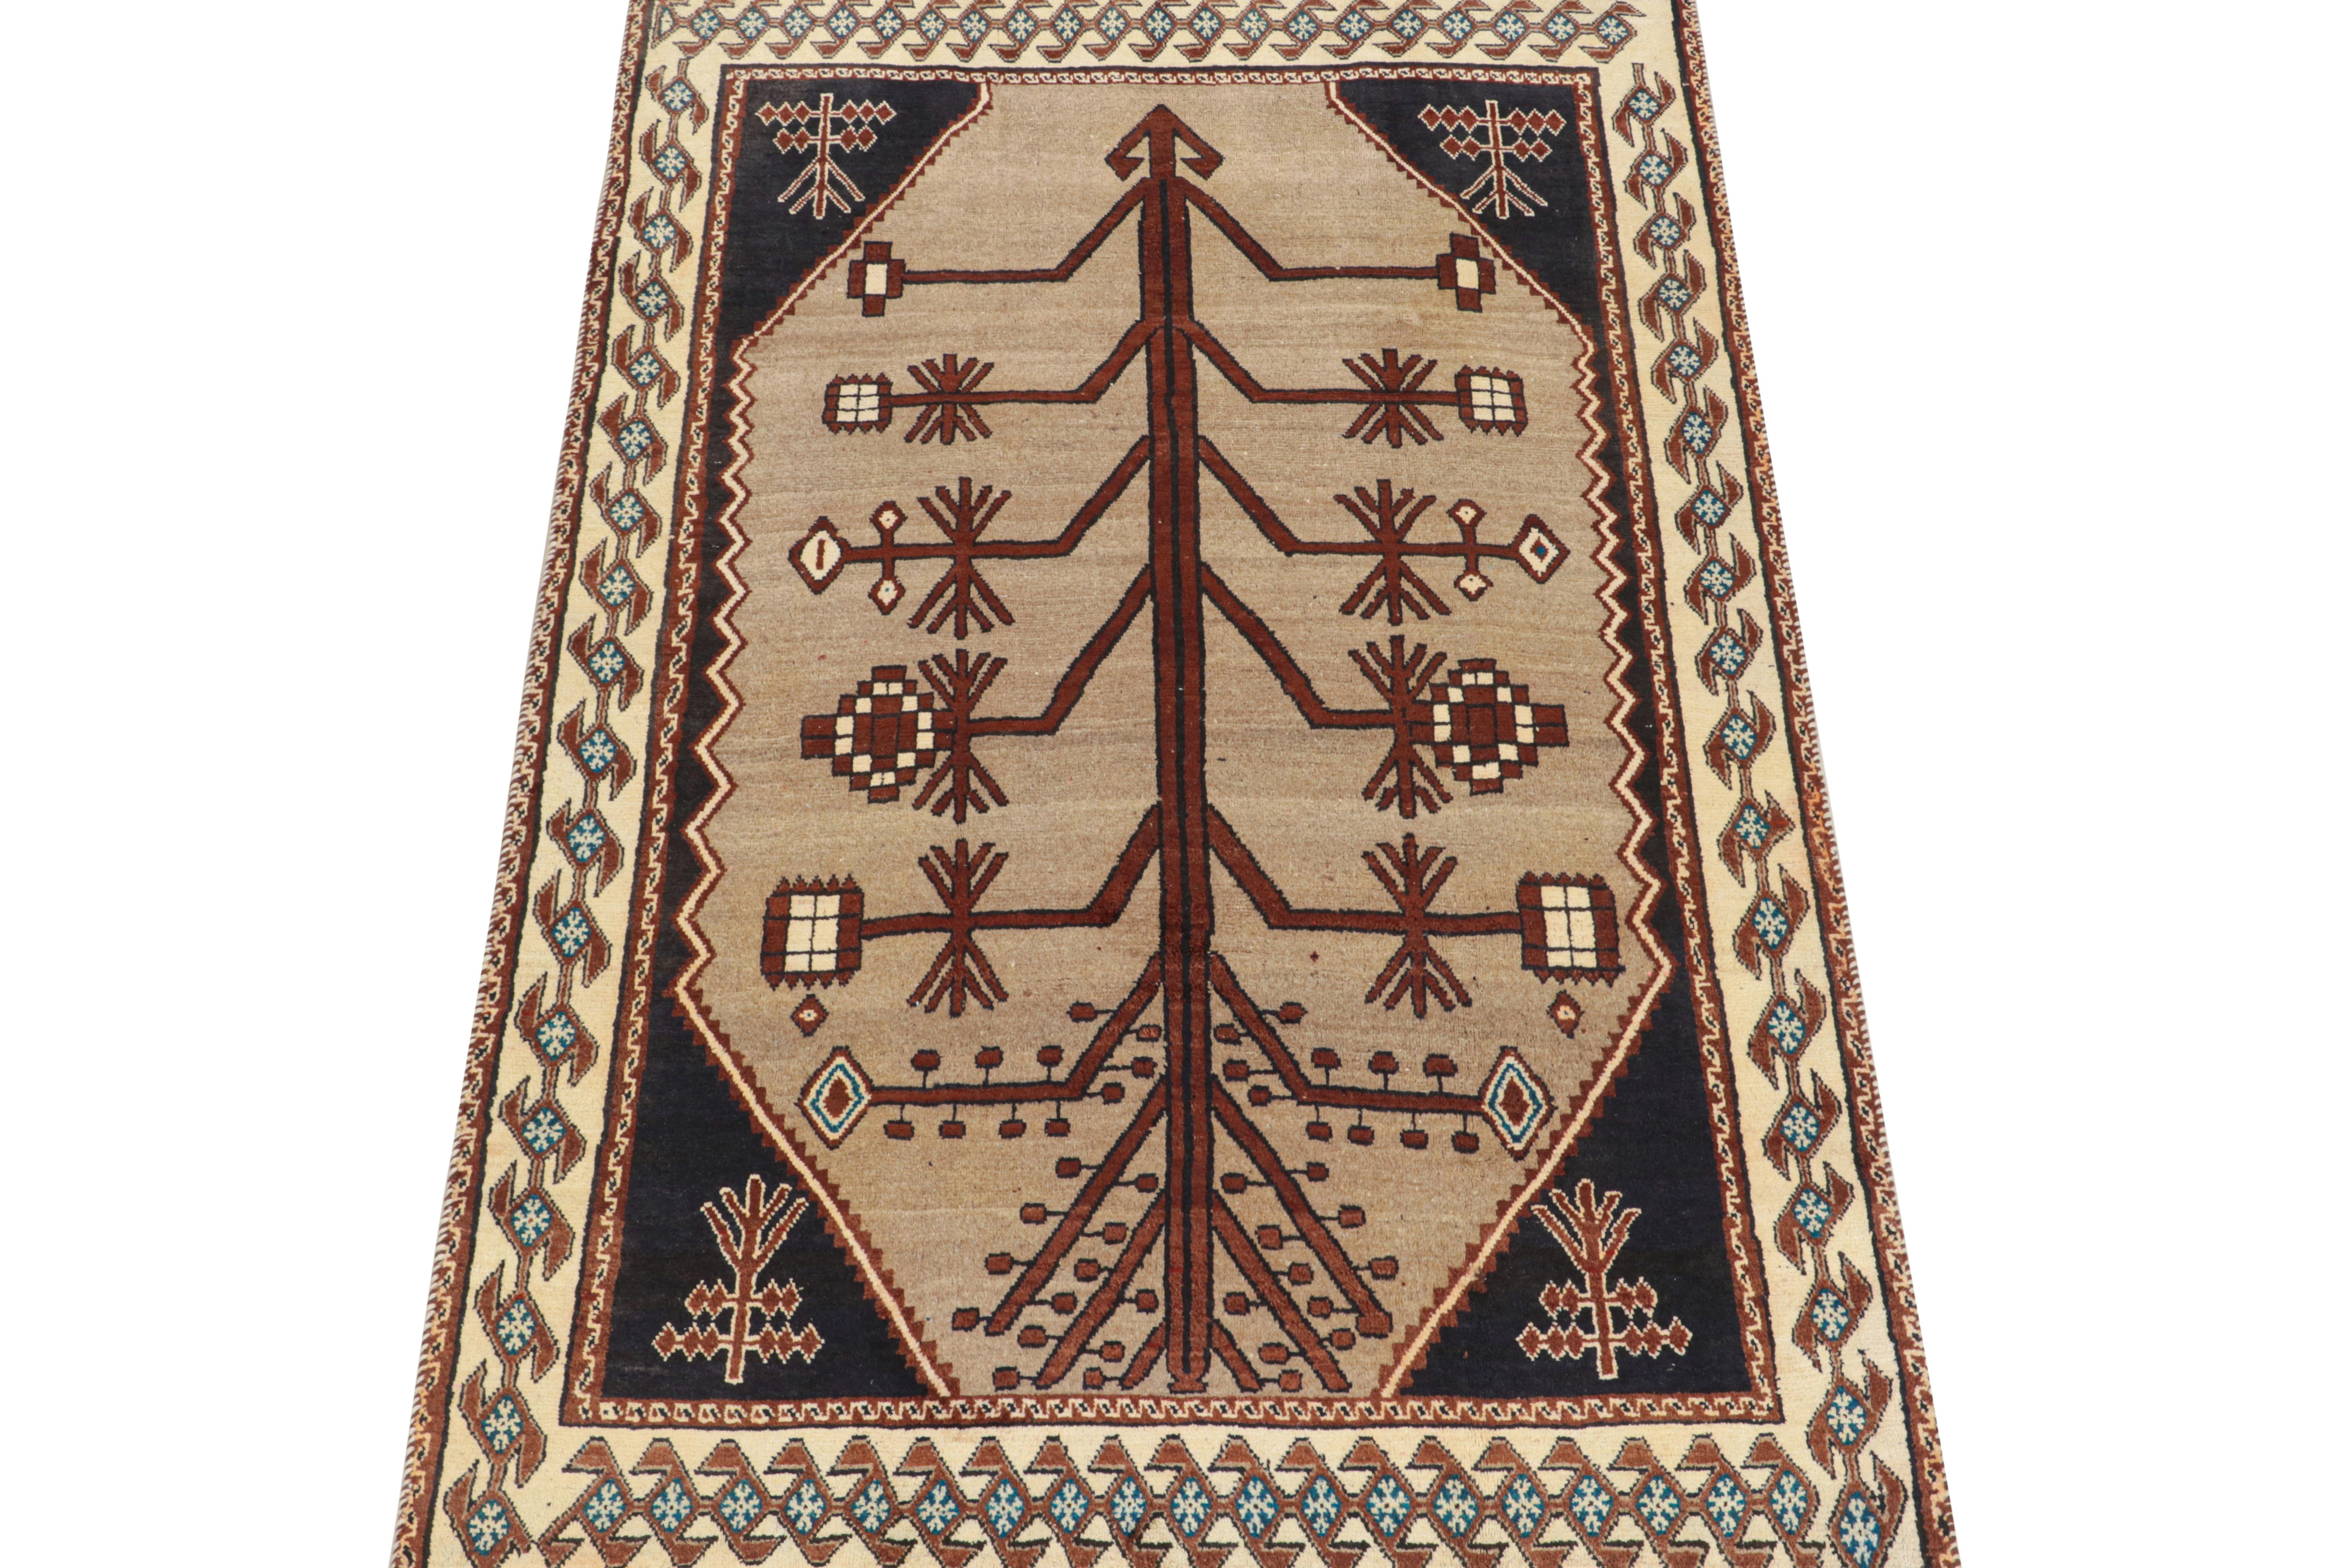 This vintage 5x8 Persian rug is a mid-century tribal piece, hand-knotted in wool circa 1950-1960.

Its design enjoys a medallion pattern in chocolate brown that resembles a primitivist tree depiction on a beige background. Navy blue, off-white,